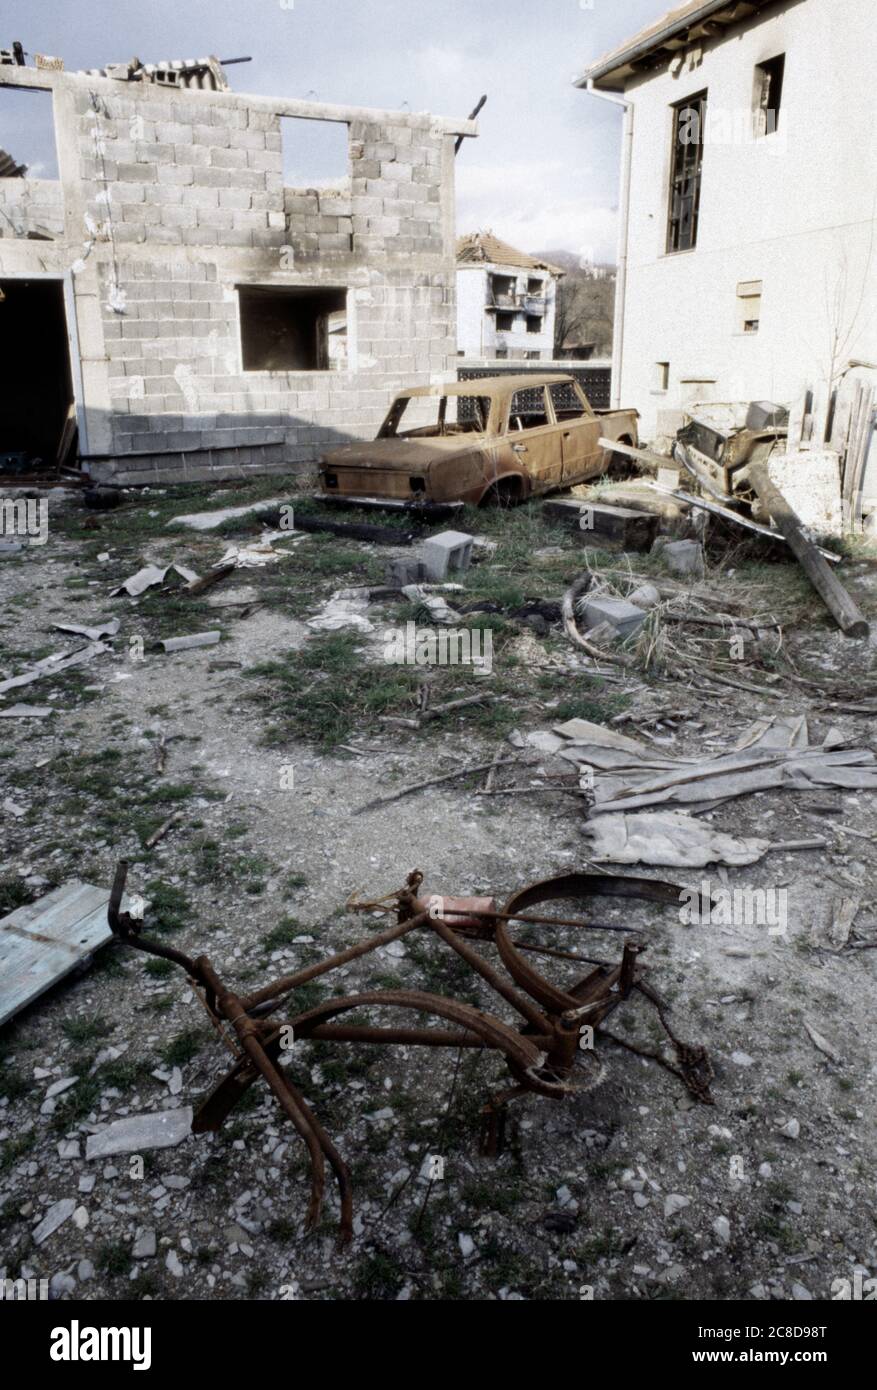 17th March 1994 During the war in Bosnia: destruction in Ahmići, a few miles east of Vitez, in central Bosnia, where the Bosnian Croats (HVO) 'ethnically cleansed' the village on the 16th April 1993, murdering more than one hundred people. Stock Photo